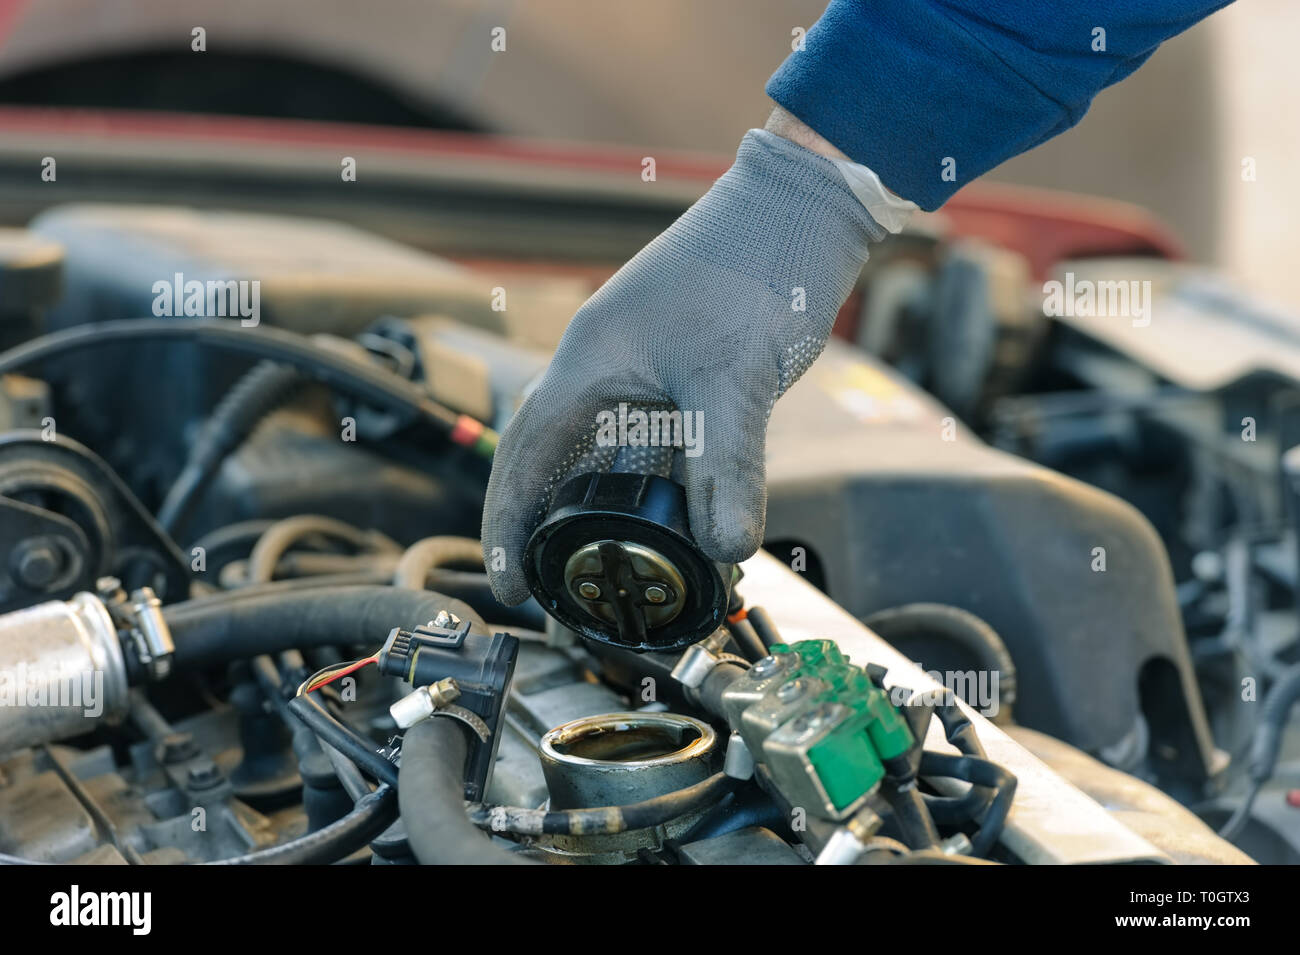 engine oil changing at car with liquefied petroleum gas system Stock Photo